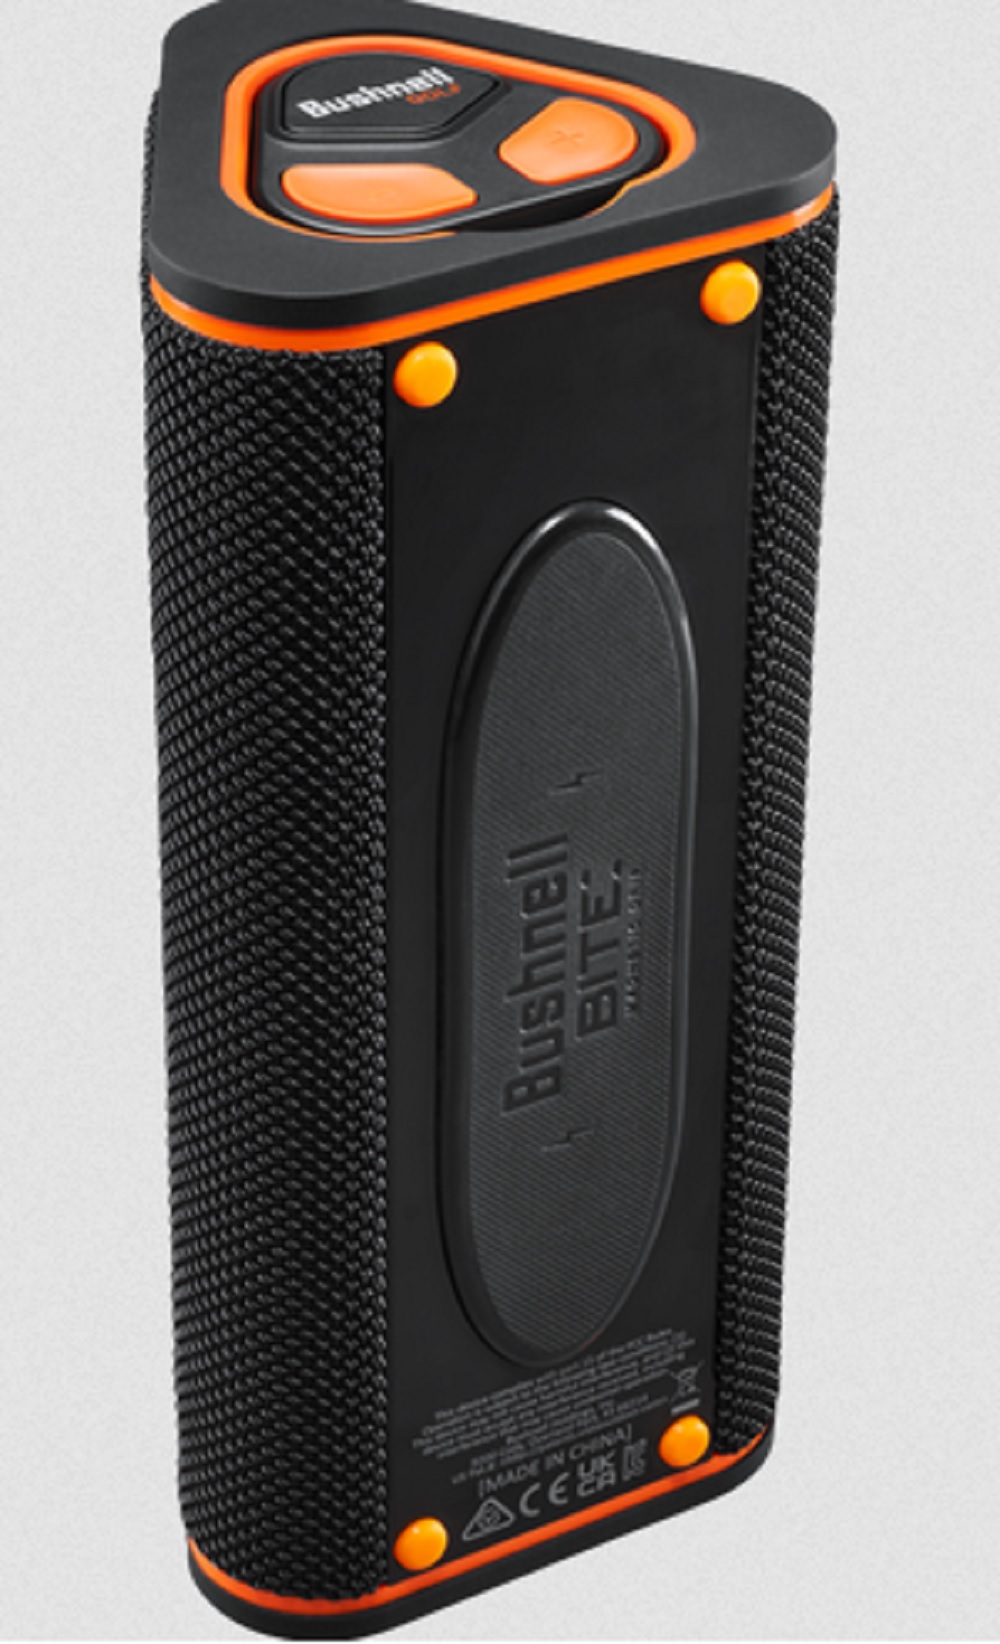 Bushnell Wingman View The Next Generation of Golf Speakers